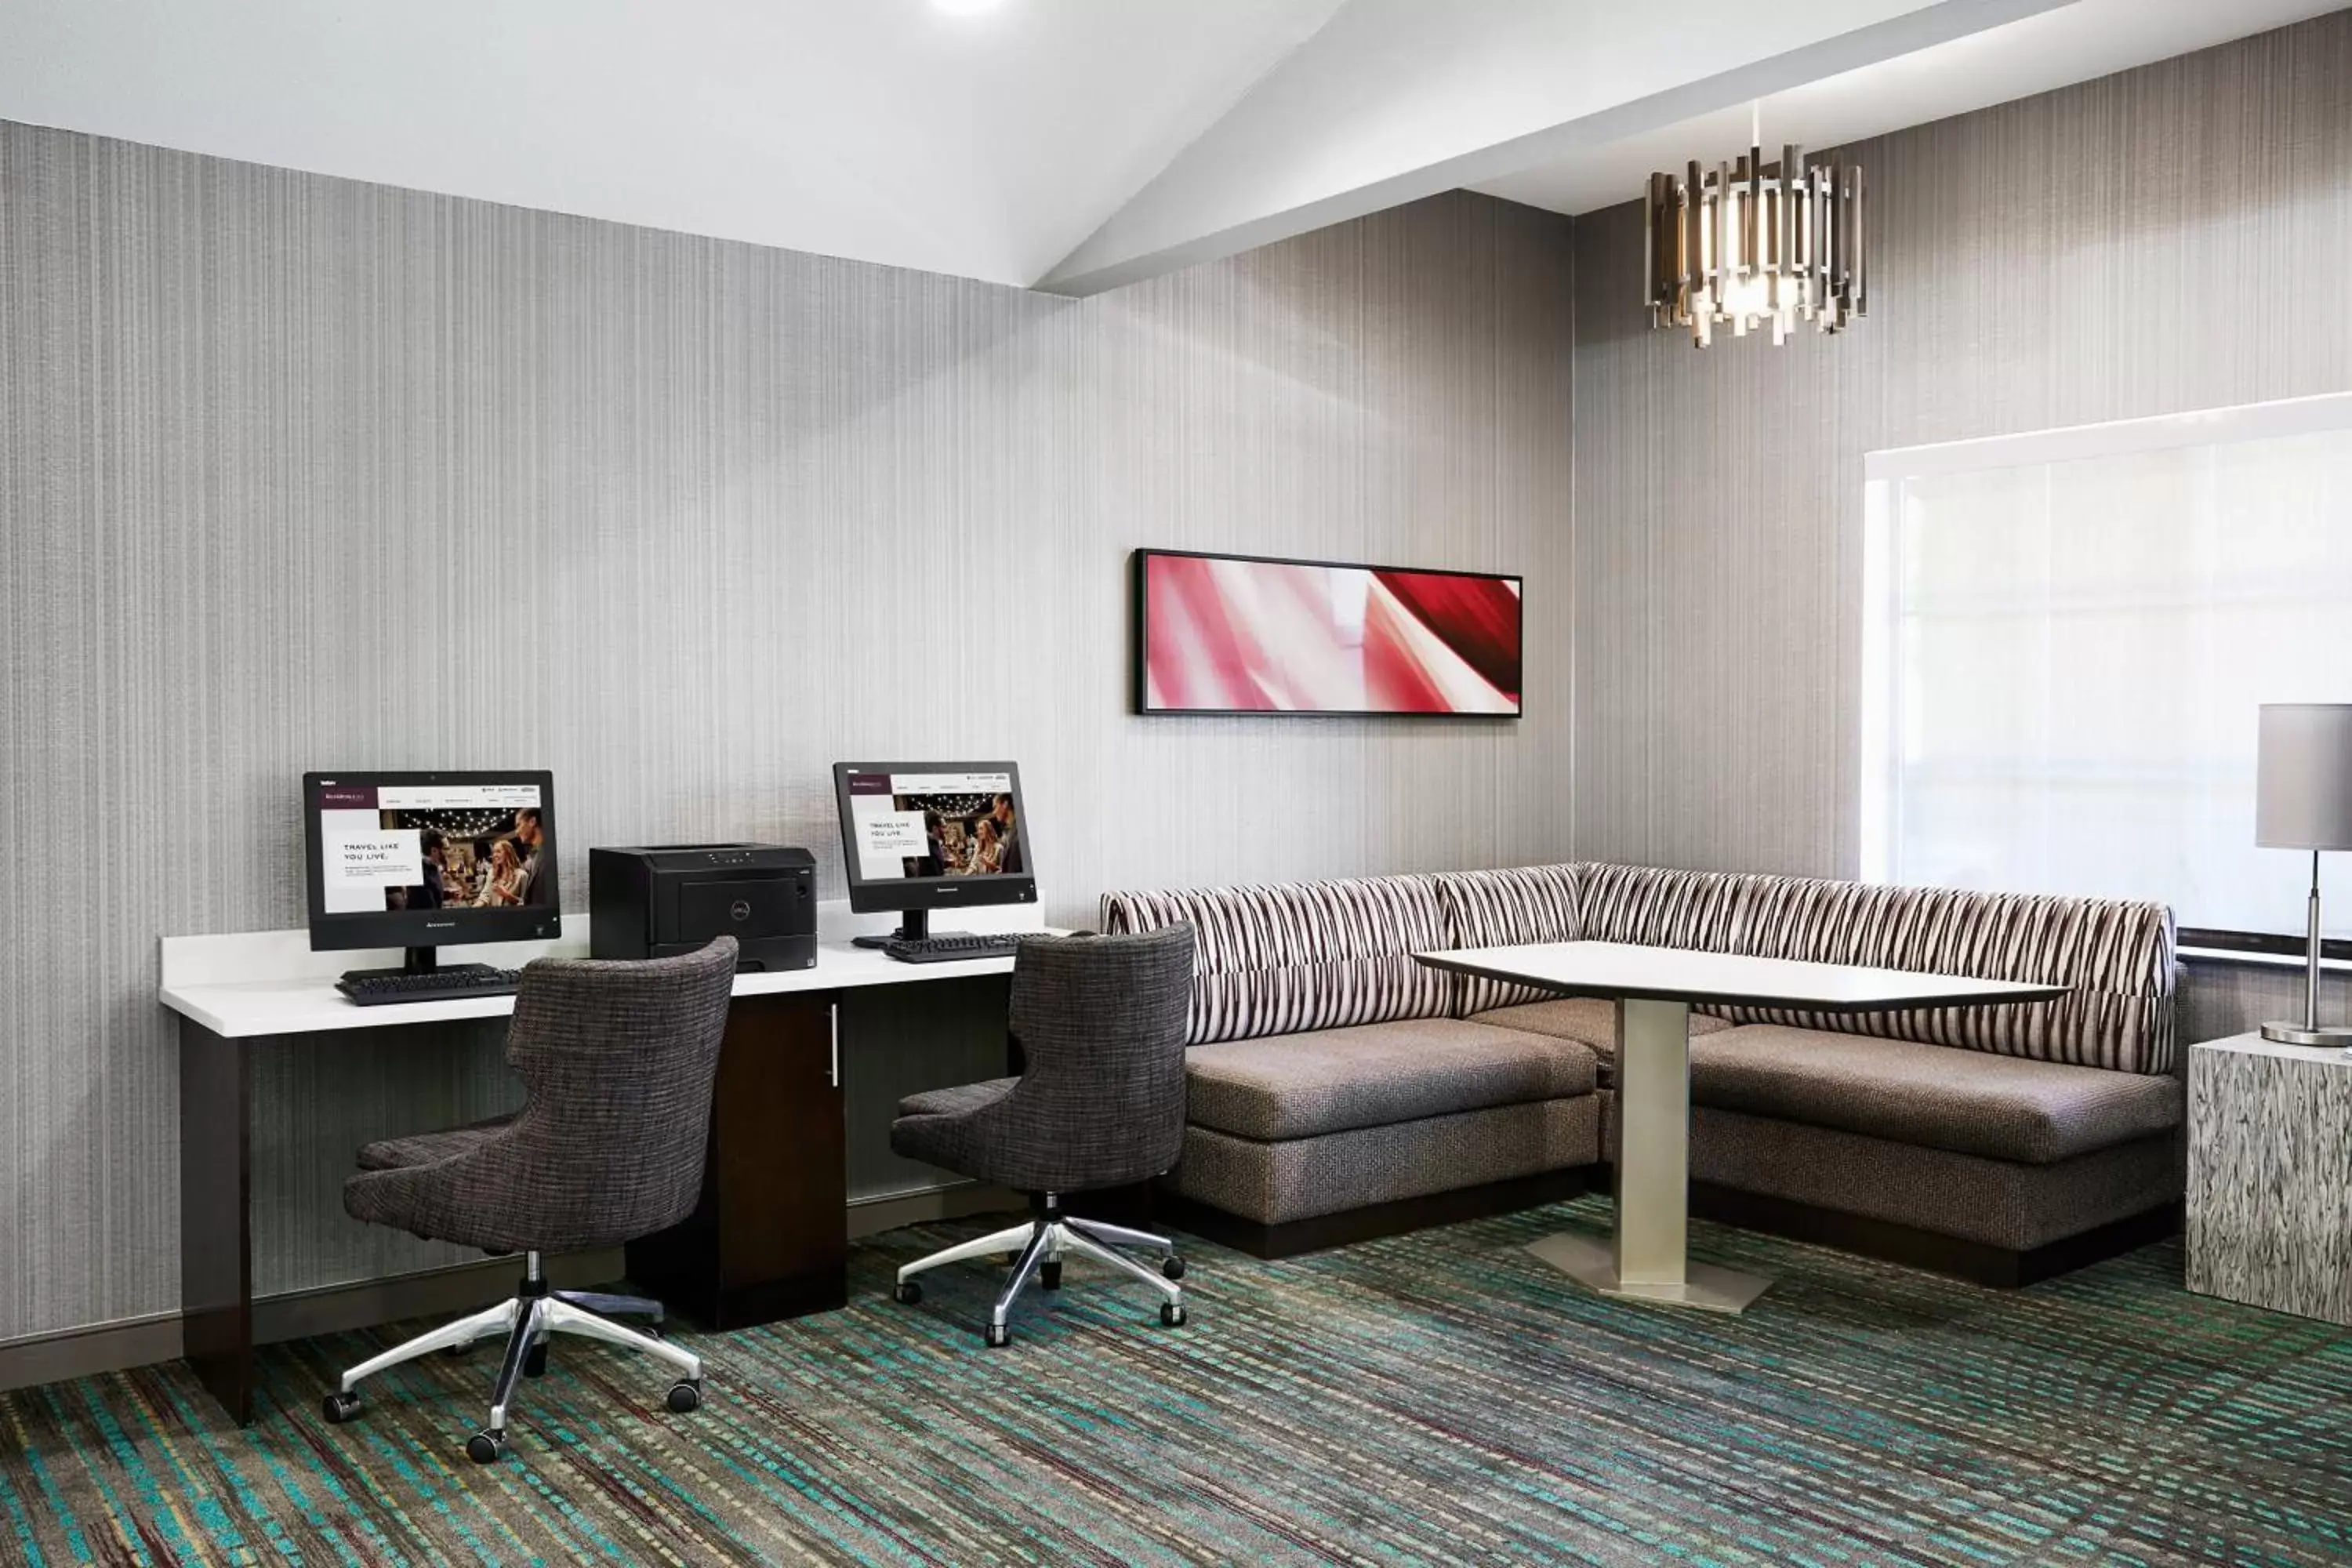 Business facilities in Residence Inn Temple